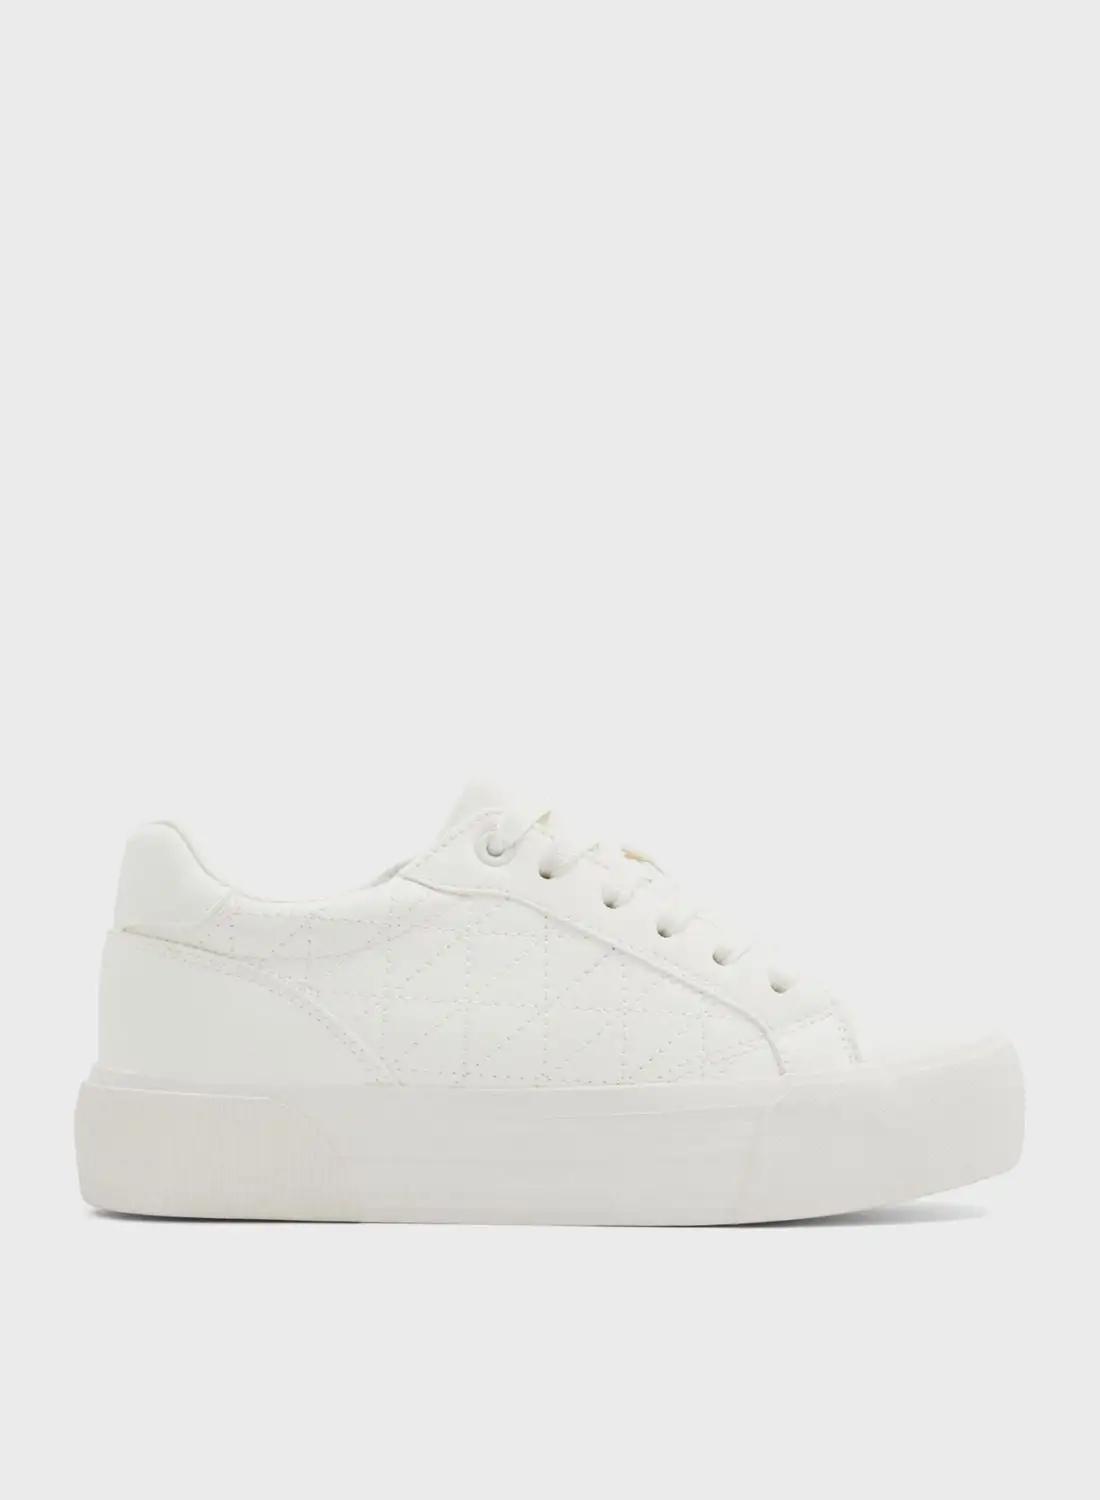 CALL IT SPRING Feeona Low Top Sneakers